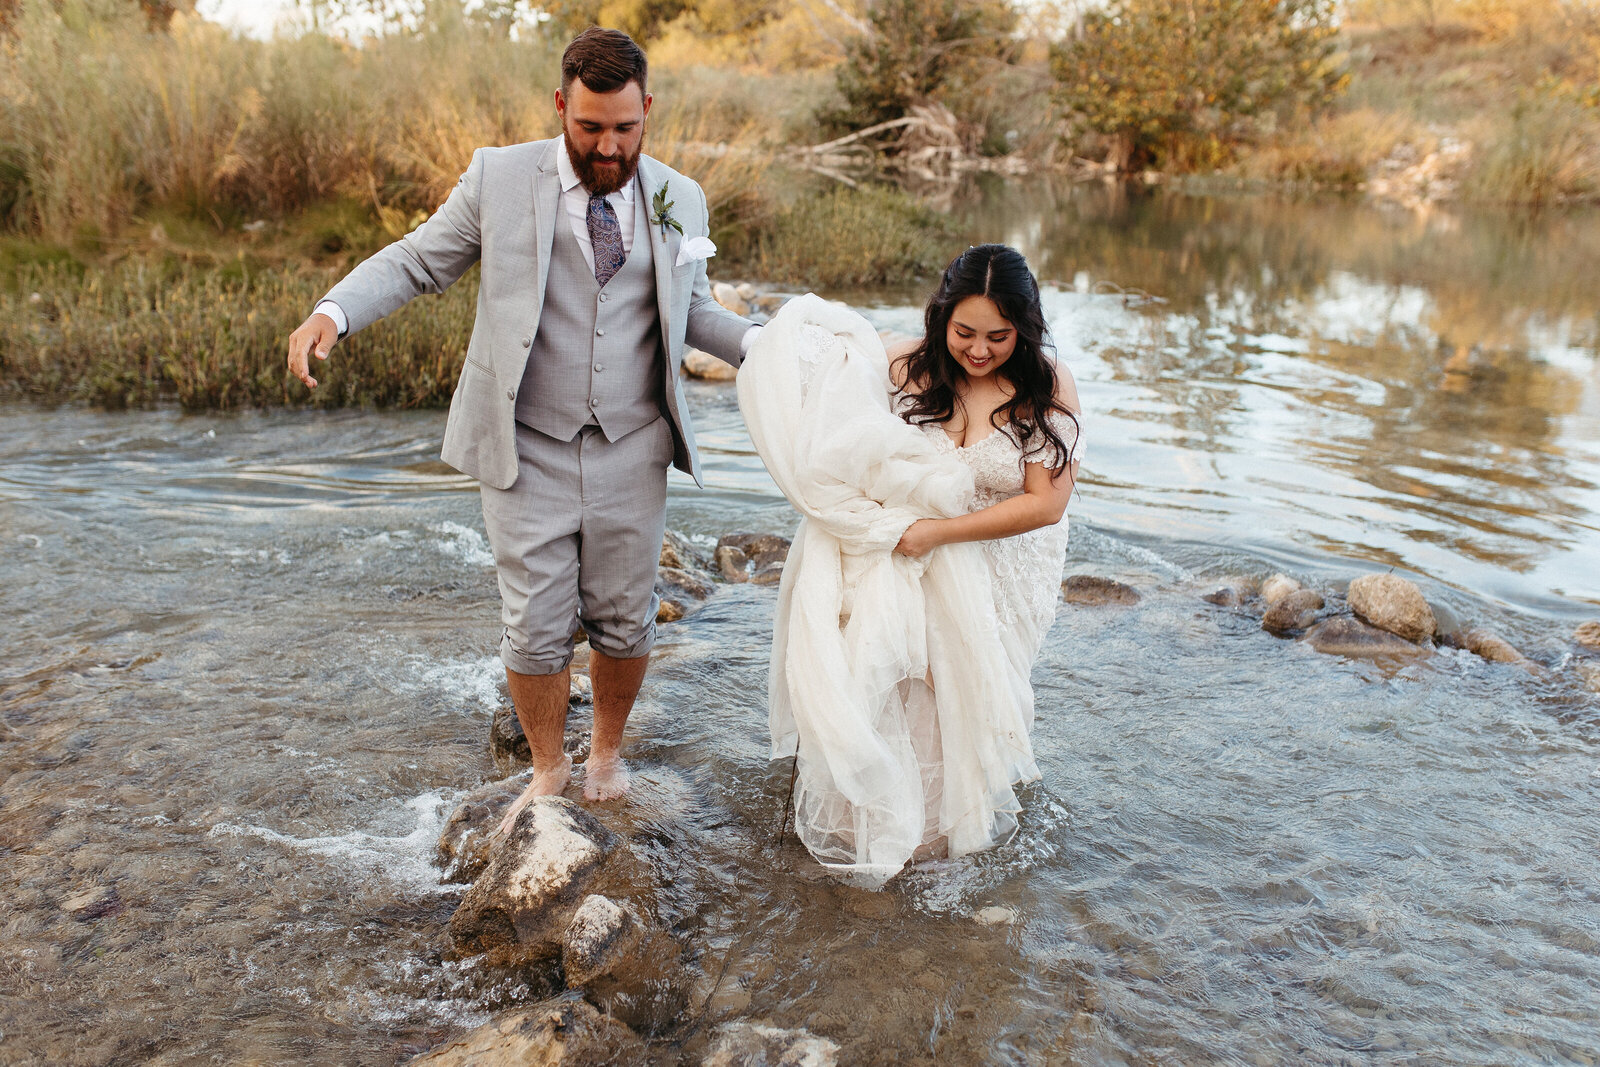 Bride and groom walking through river